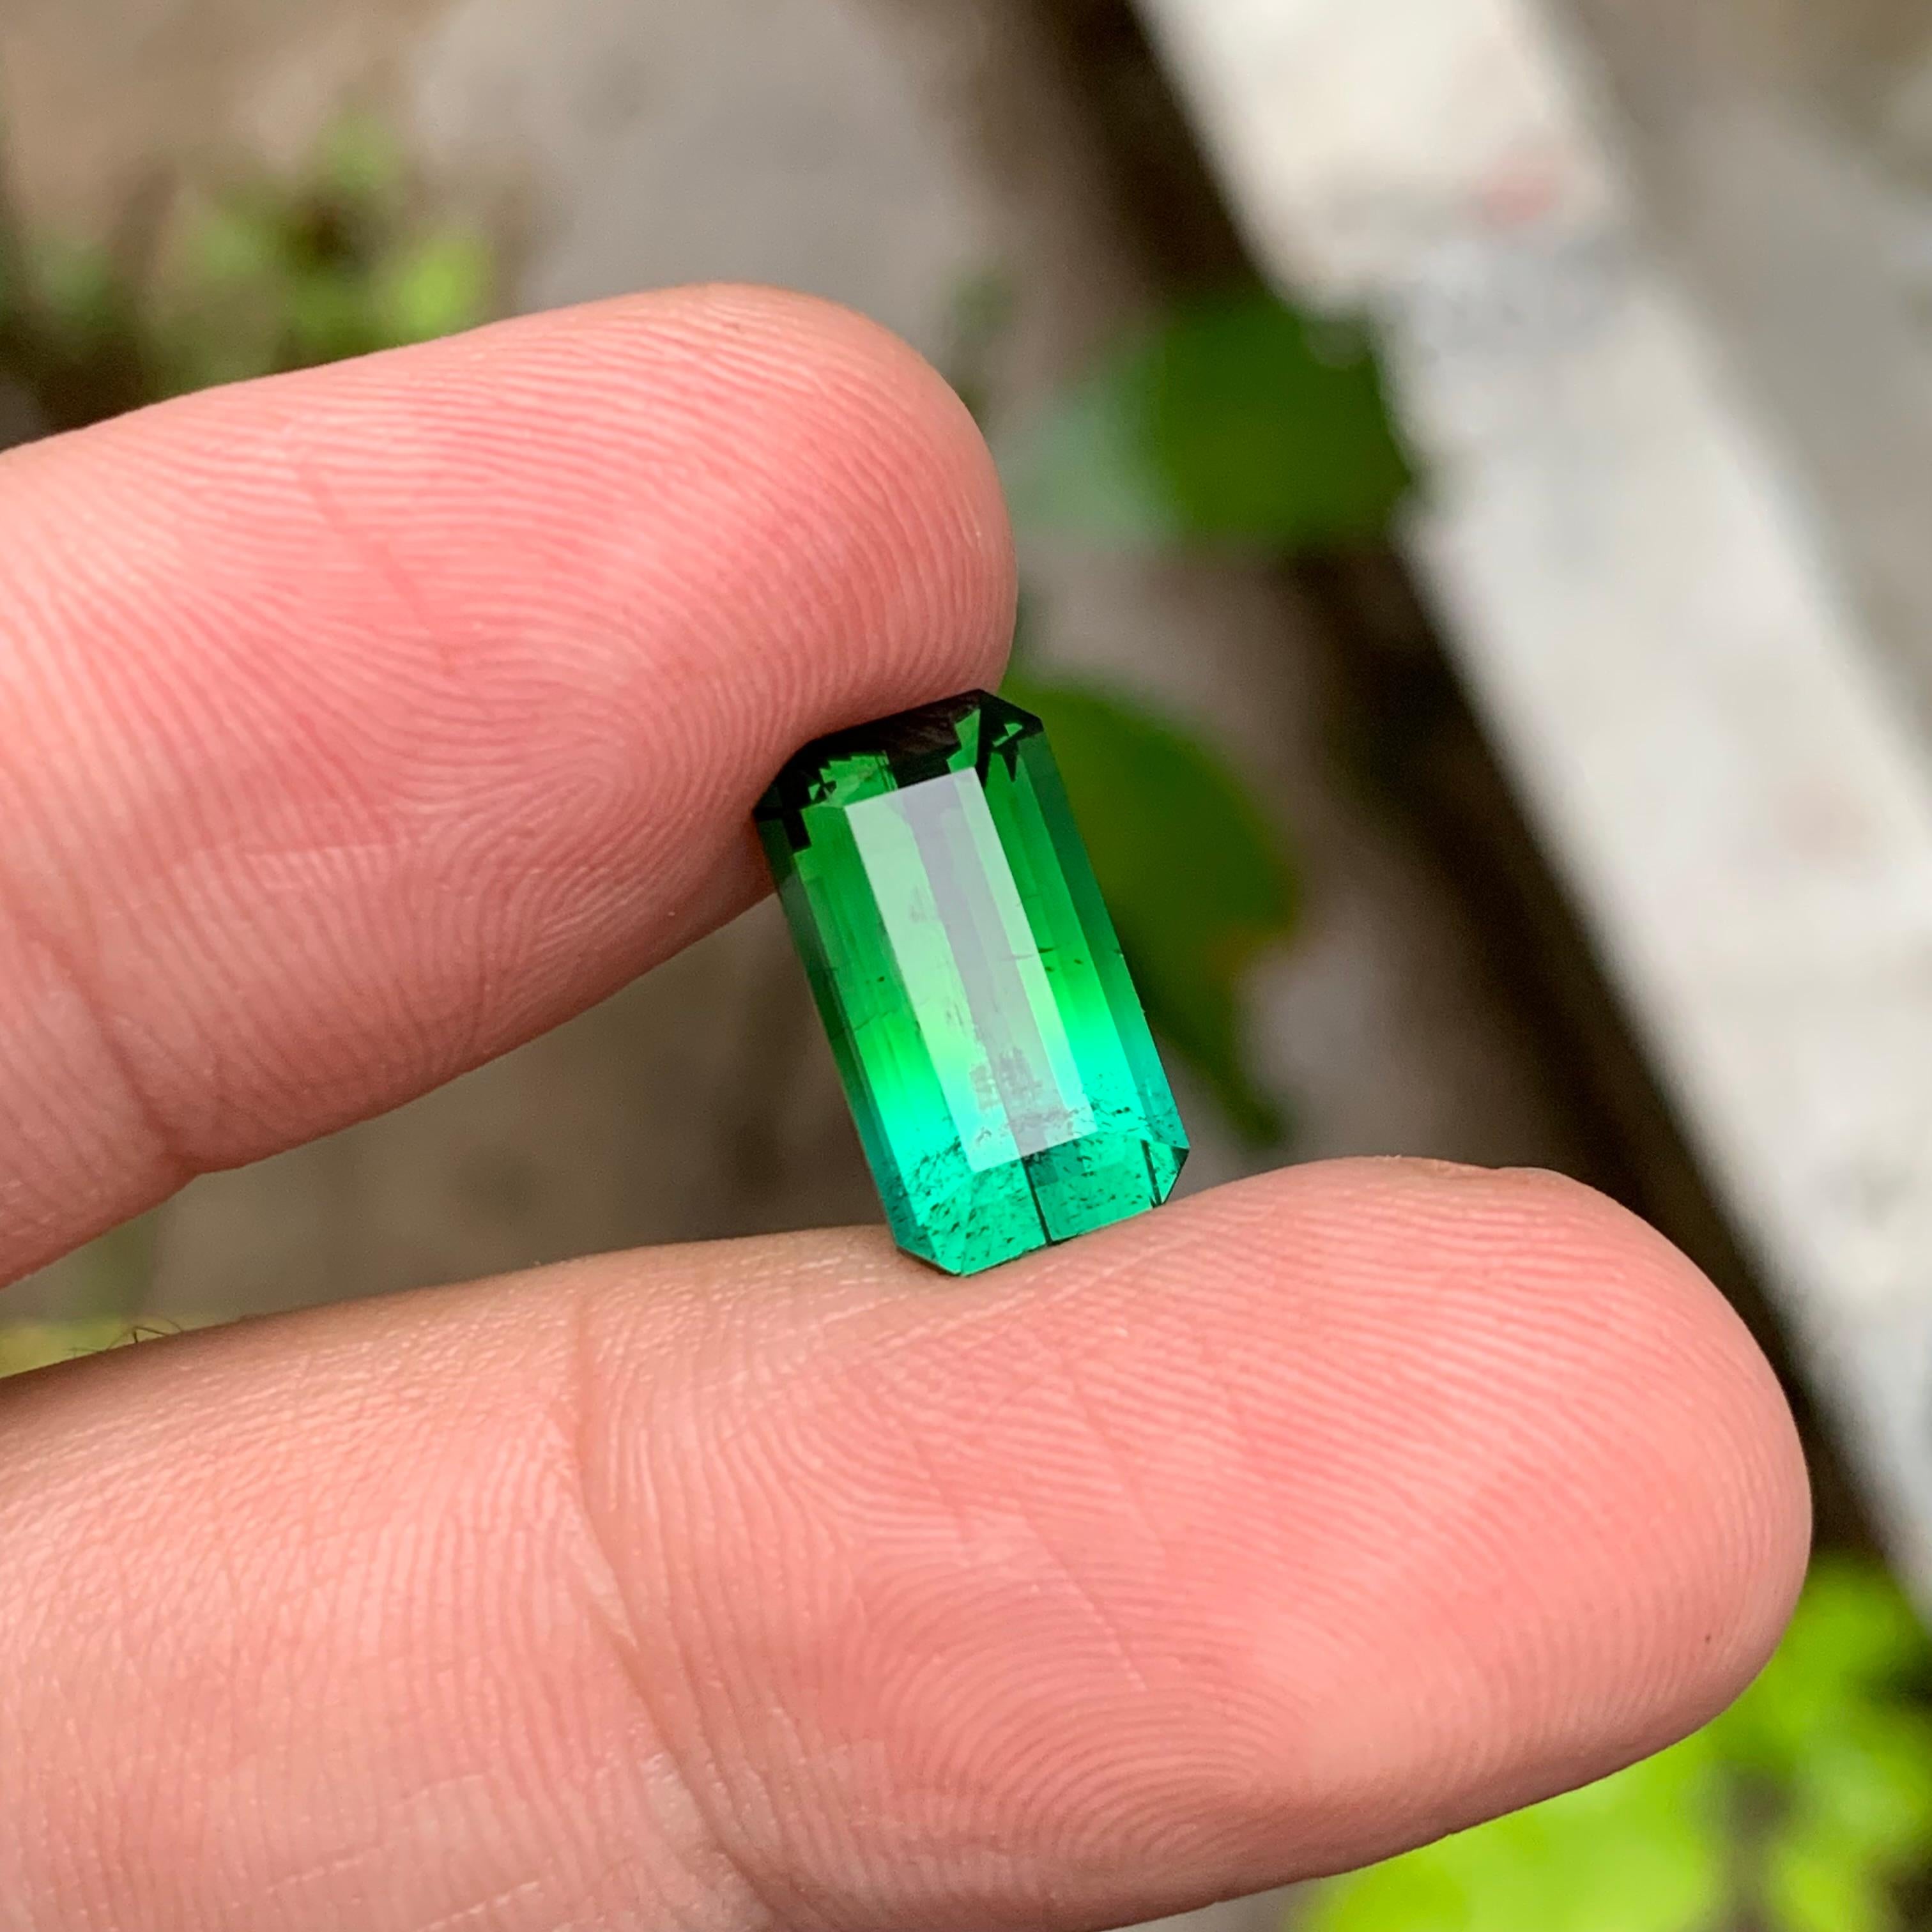 Rare Green & Neon Blue Bicolor Tourmaline Gemstone, 5.05 Ct Emerald Cut for Ring For Sale 3